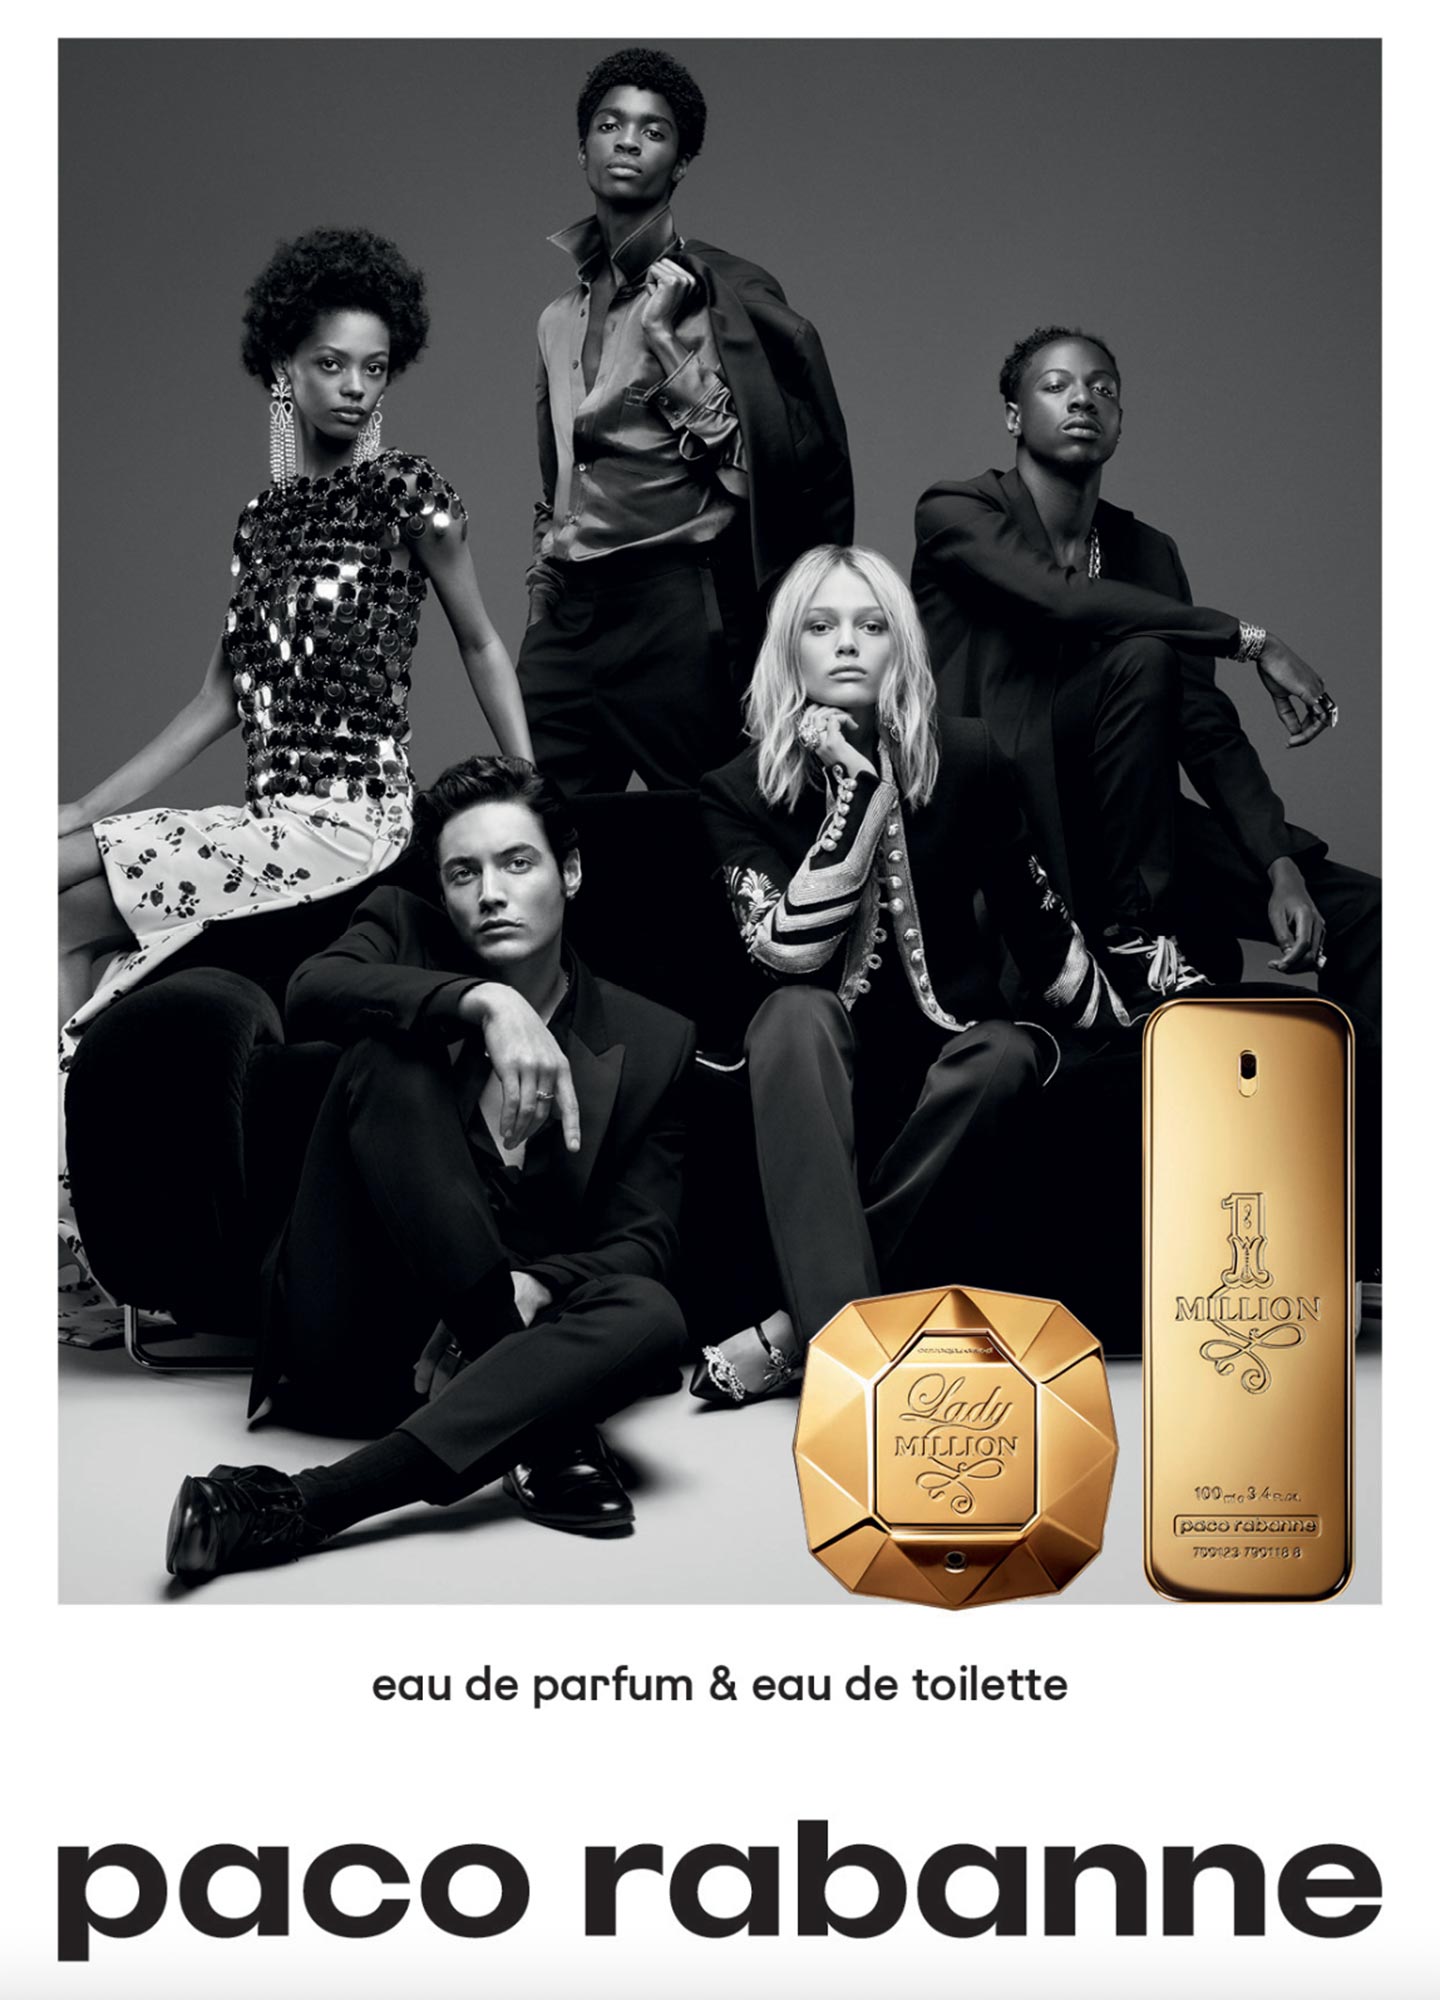 One Million and Lady Million by Paco Rabanne